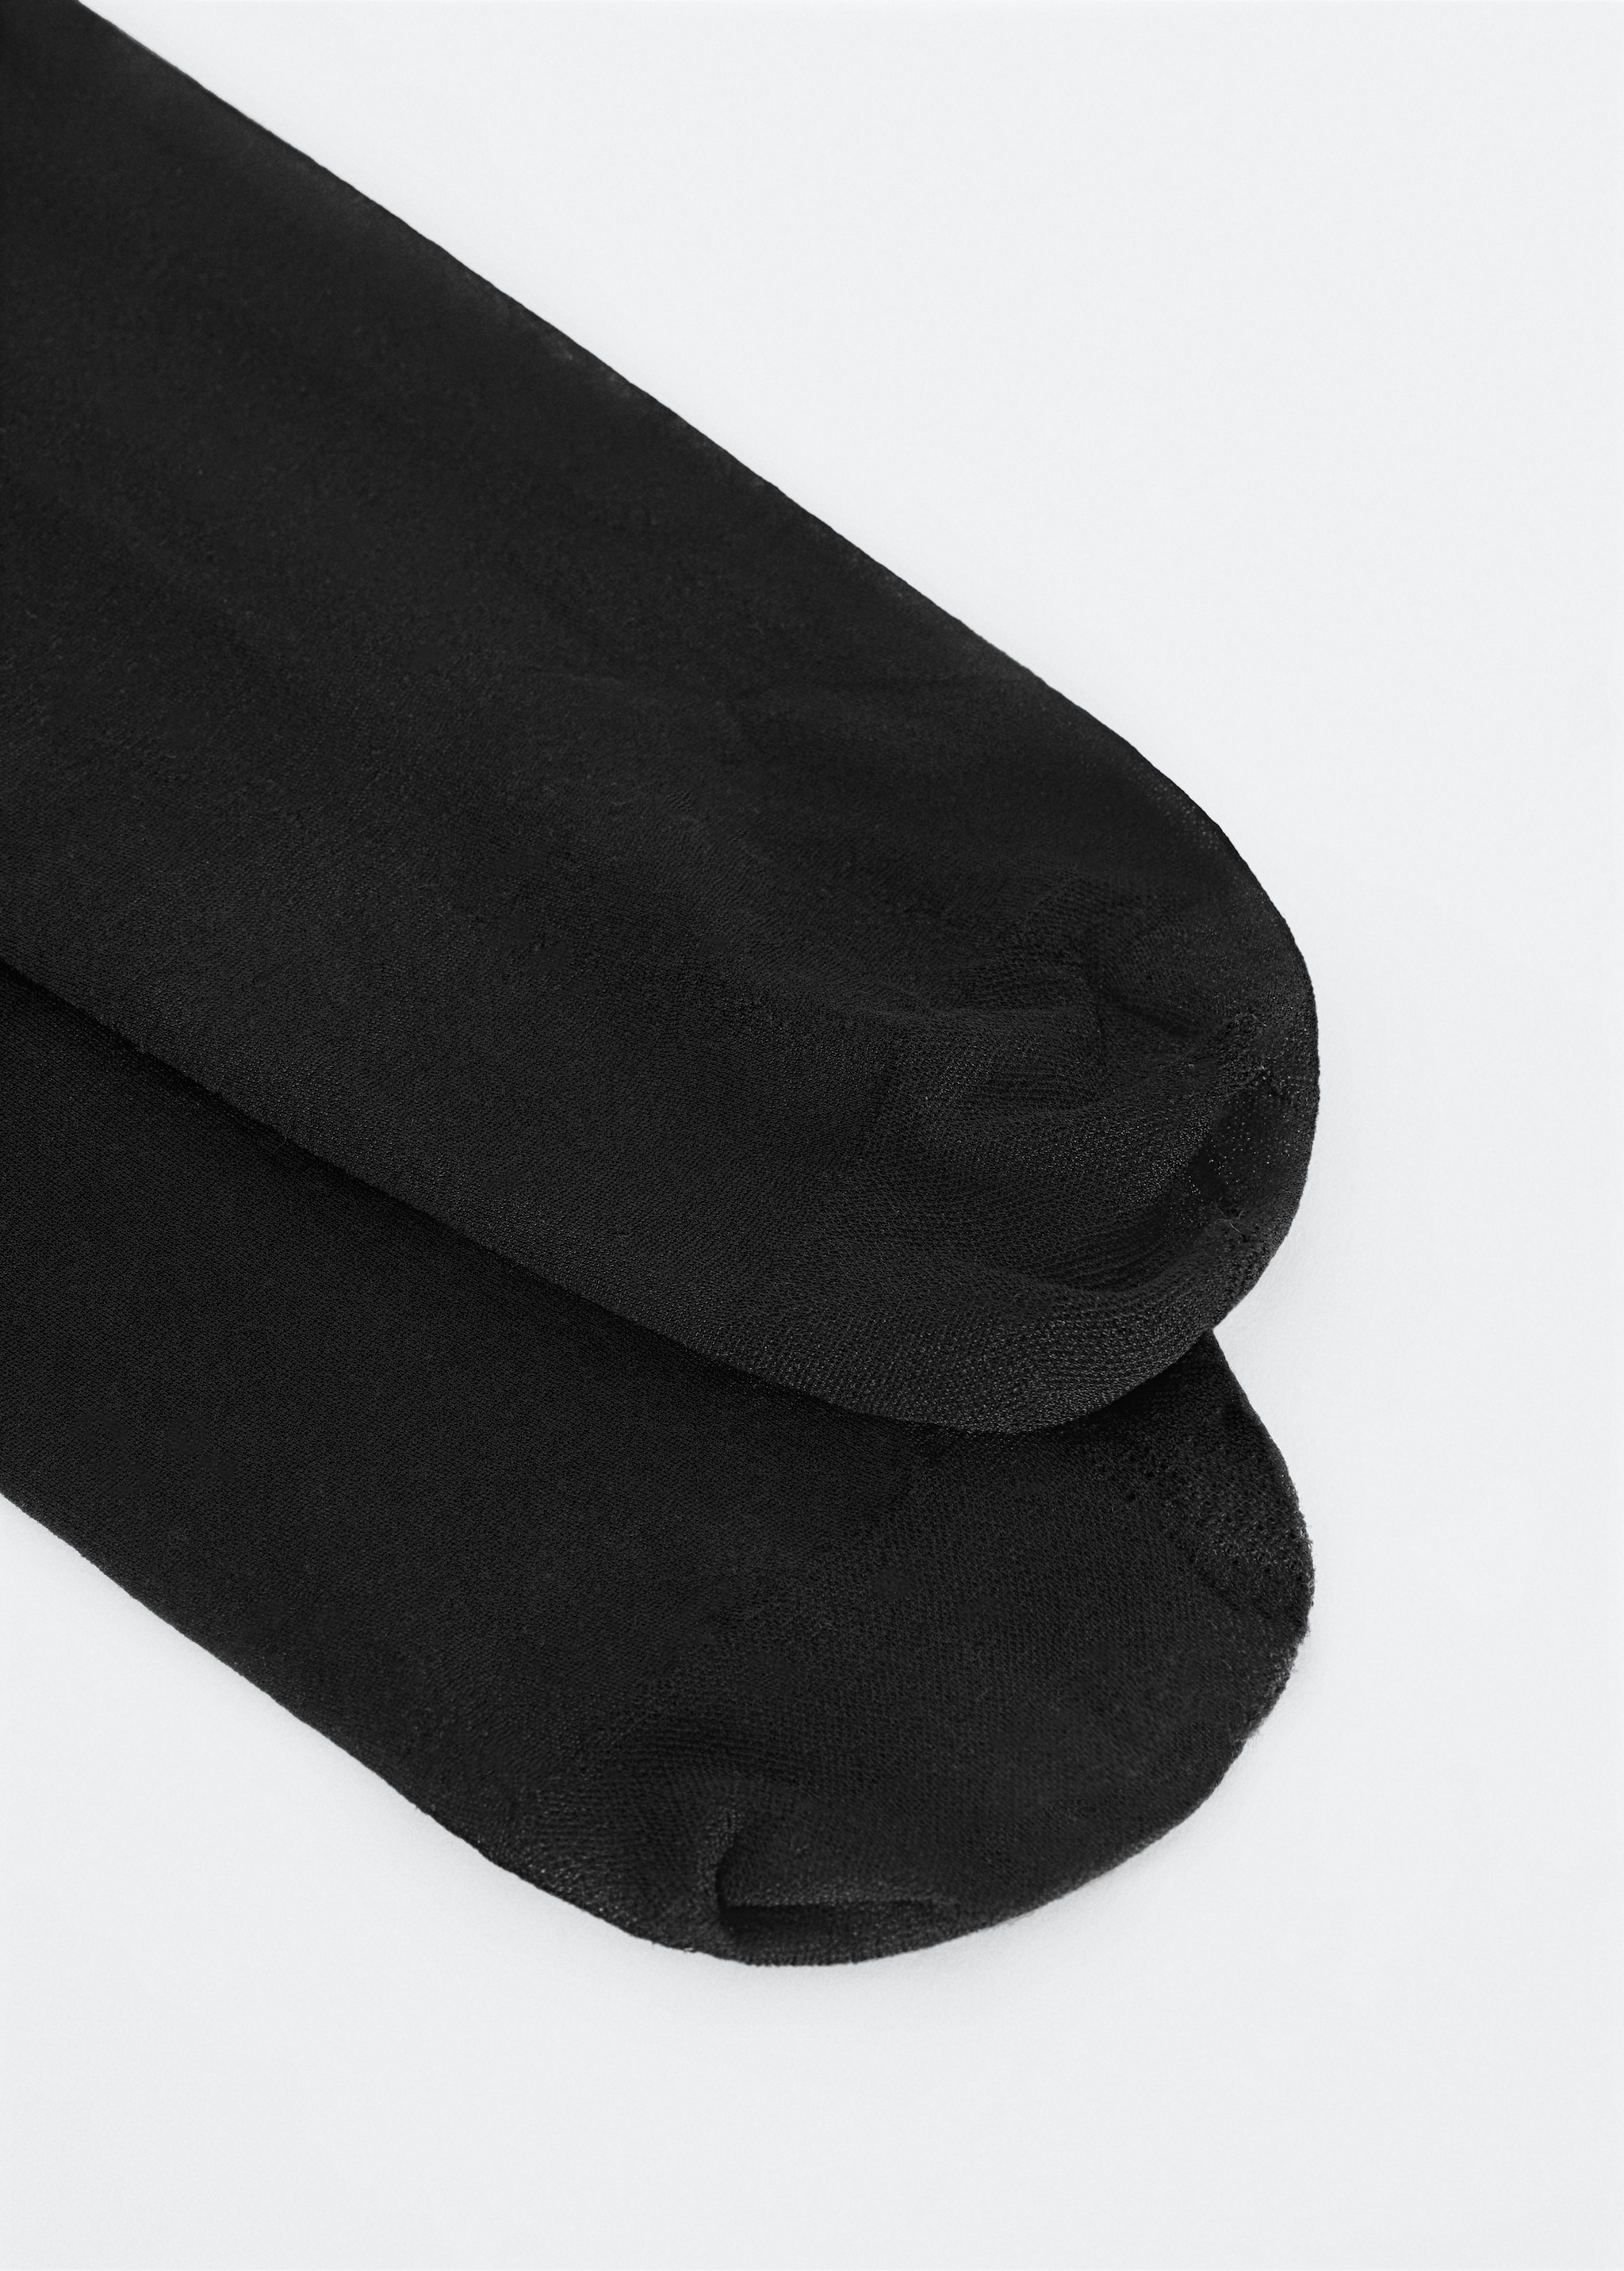 Thin veiled tights - Details of the article 1